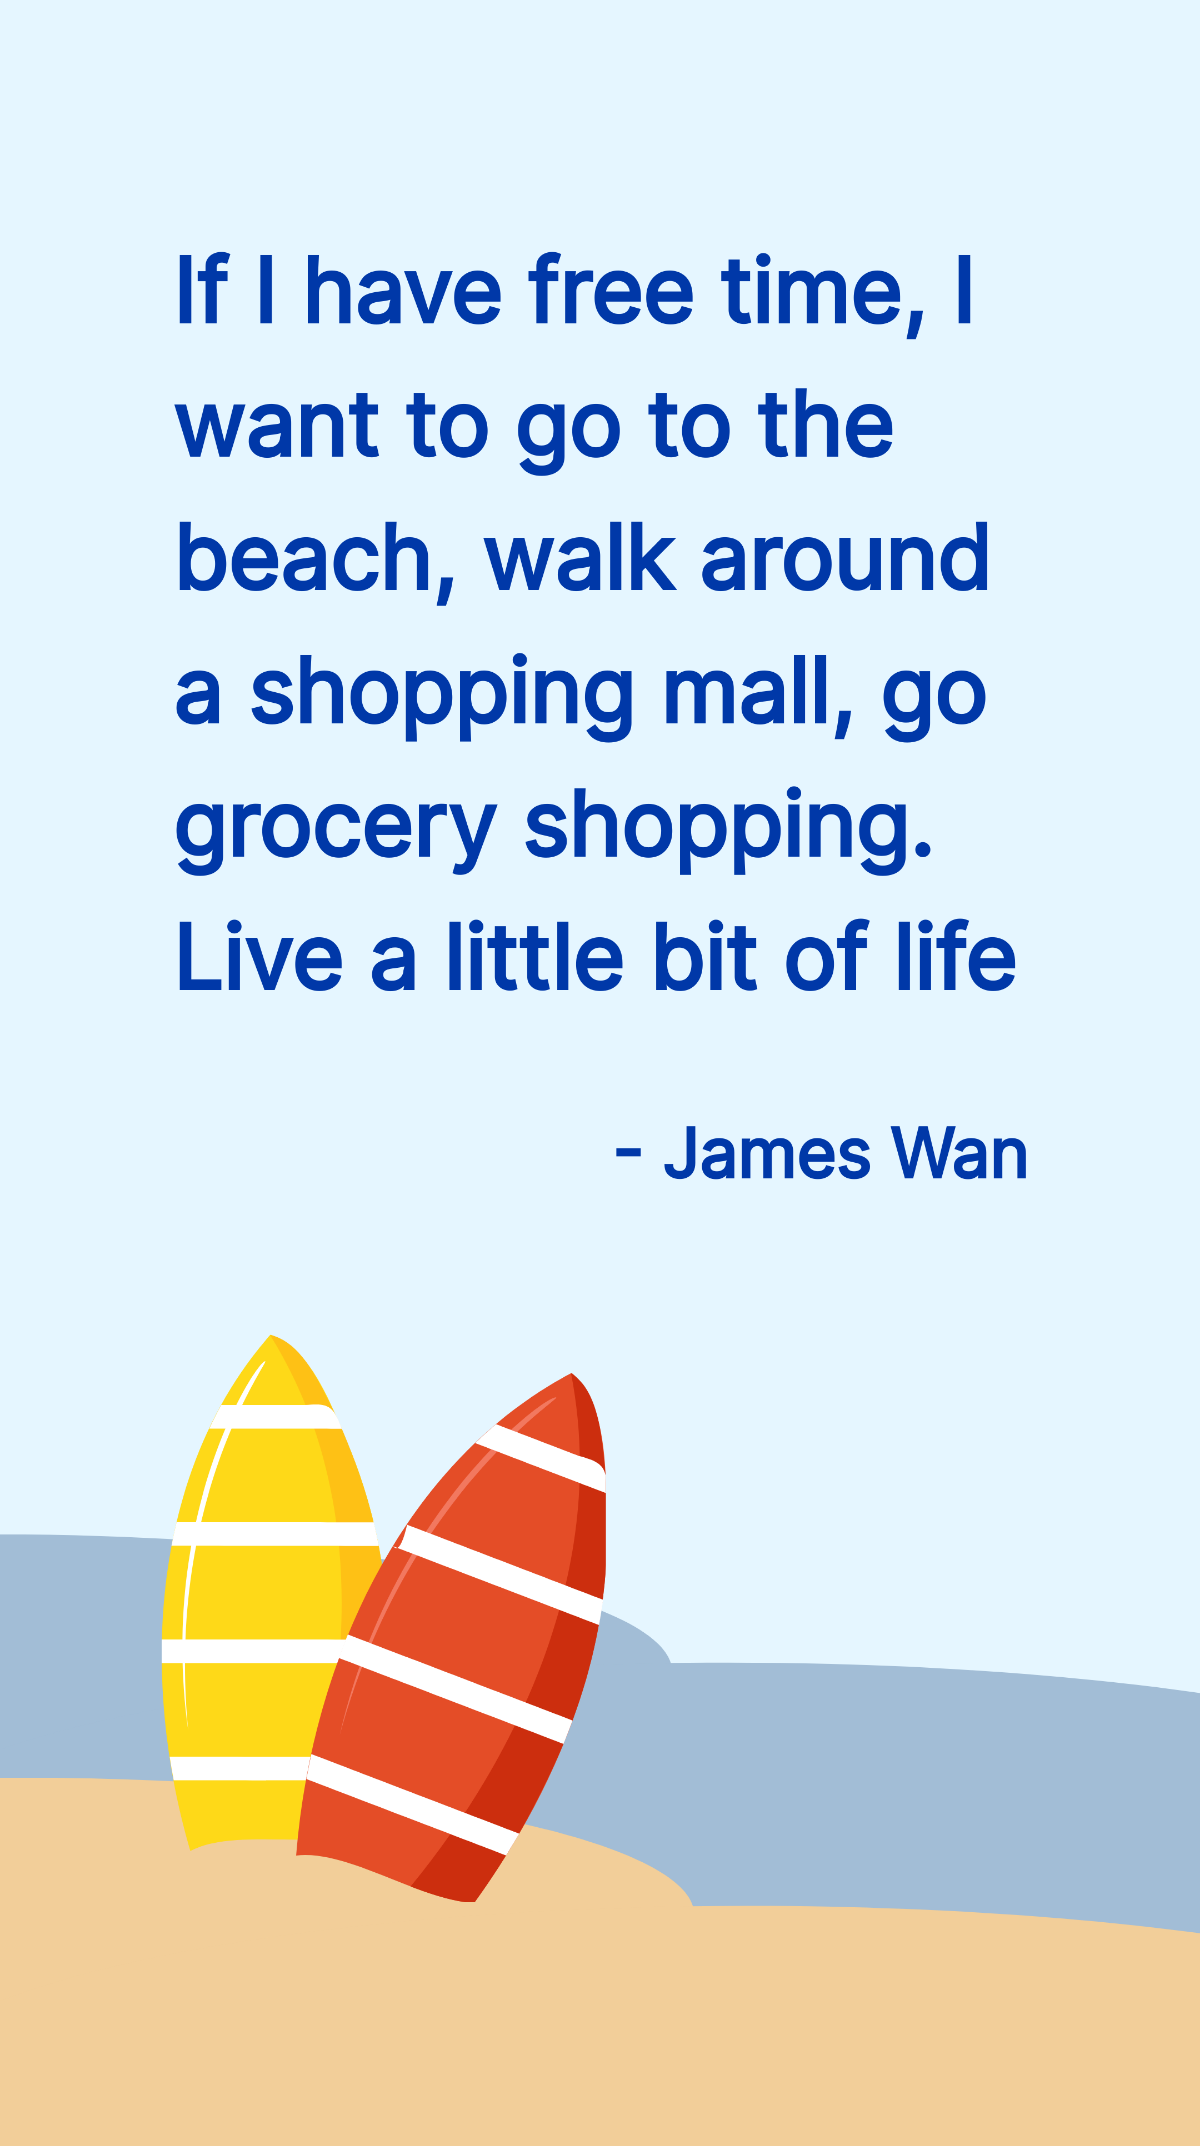 James Wan - If I have time, I want to go to the beach, walk around a shopping mall, go grocery shopping. Live a little bit of life Template